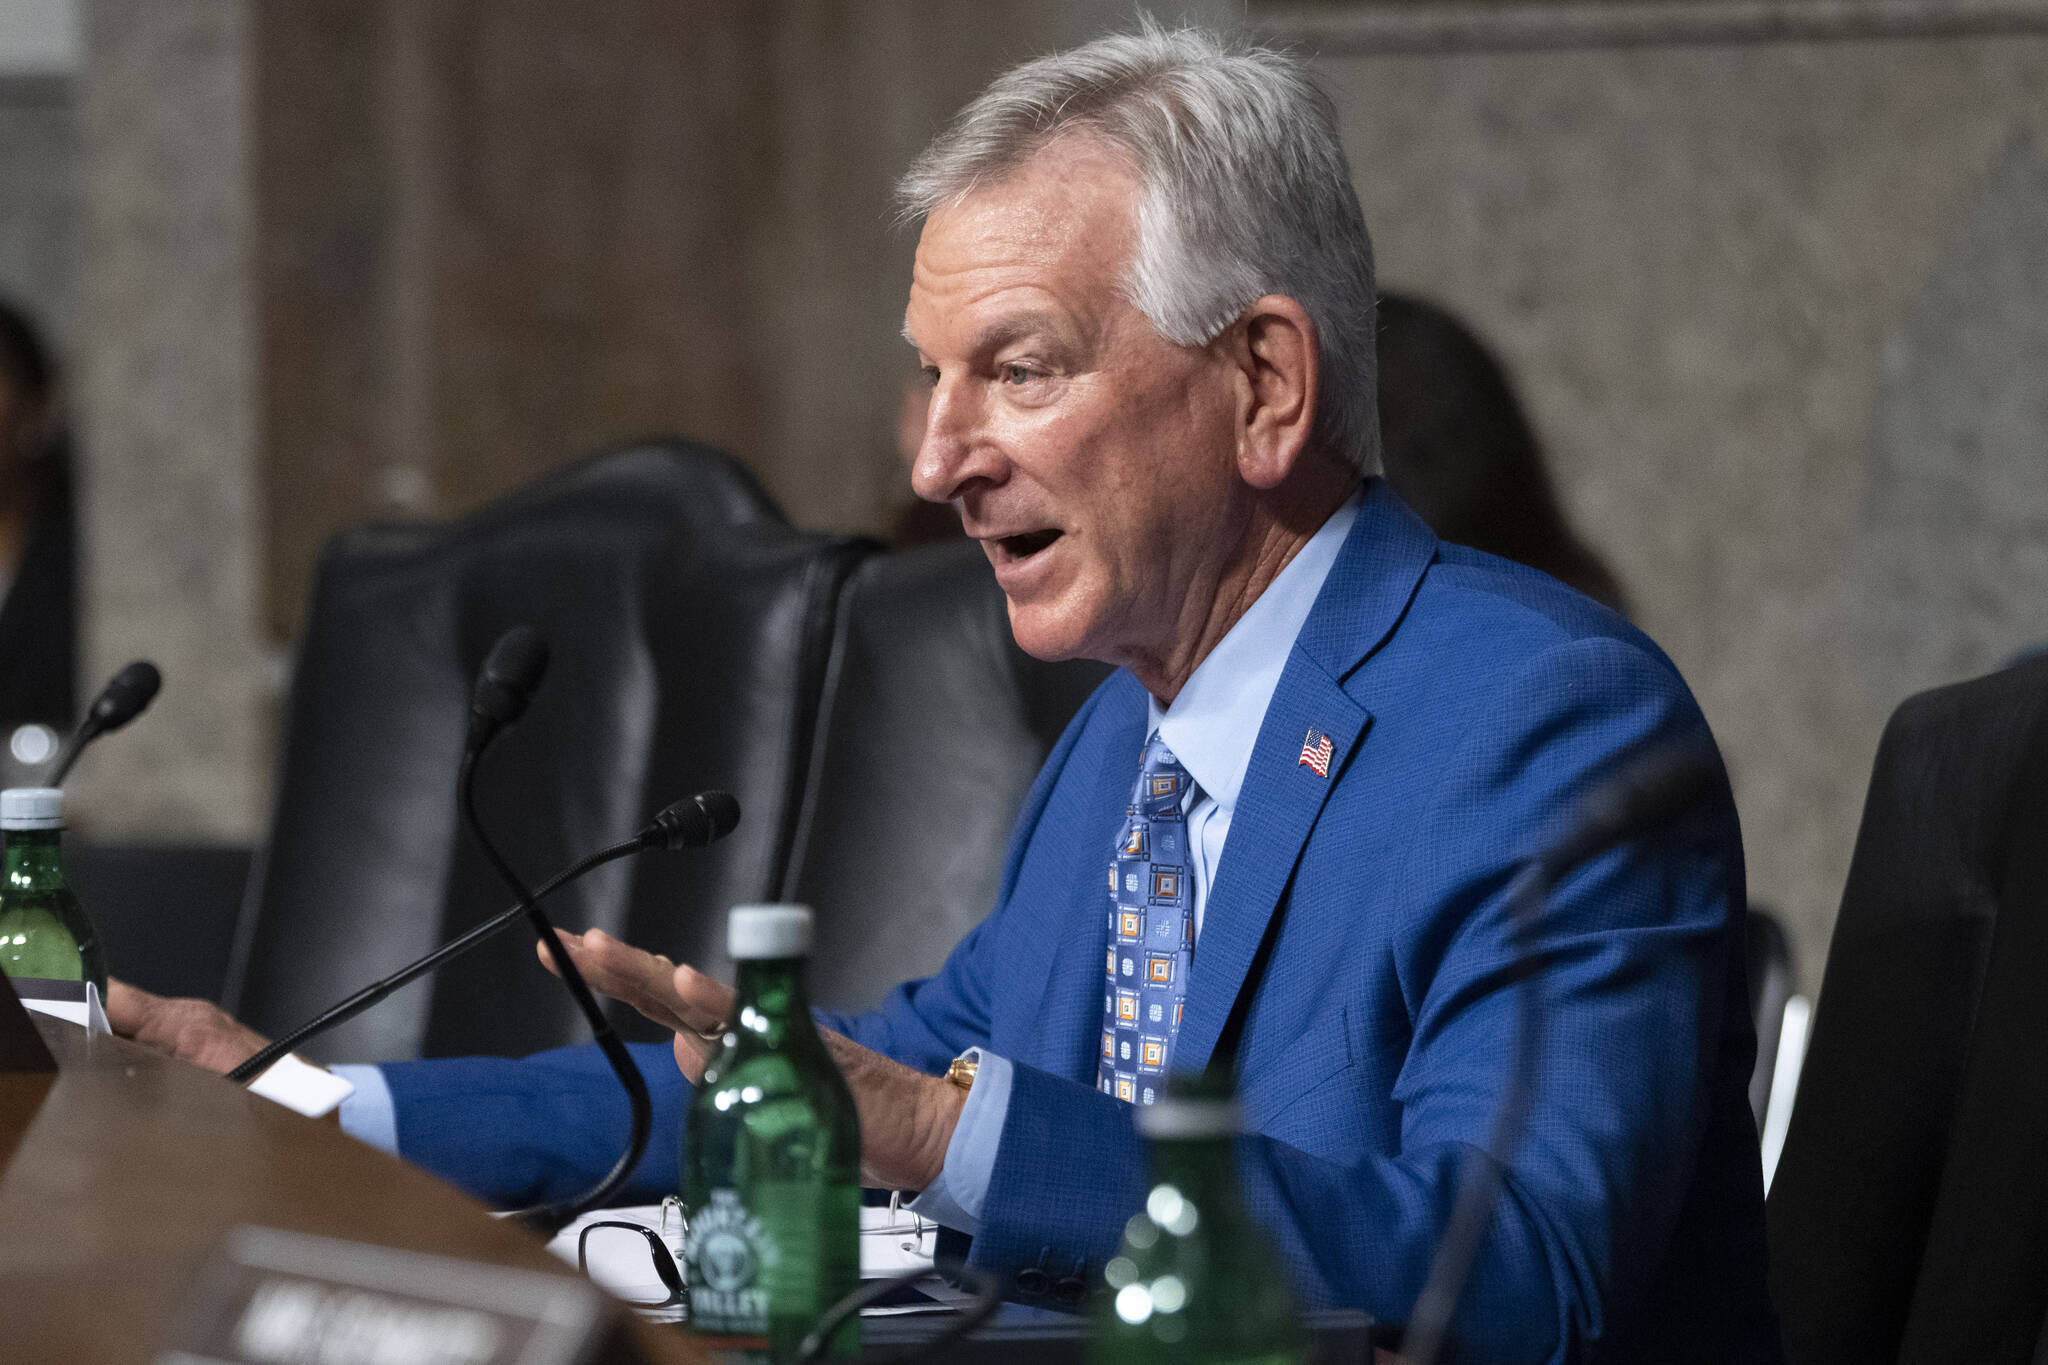 Sen. Tommy Tuberville, R-Ala., questions Navy Adm. Lisa Franchetti during a Senate Armed Services Committee hearing on Sept. 14 on Capitol Hill in Washington. (AP Photo/Jacquelyn Martin)